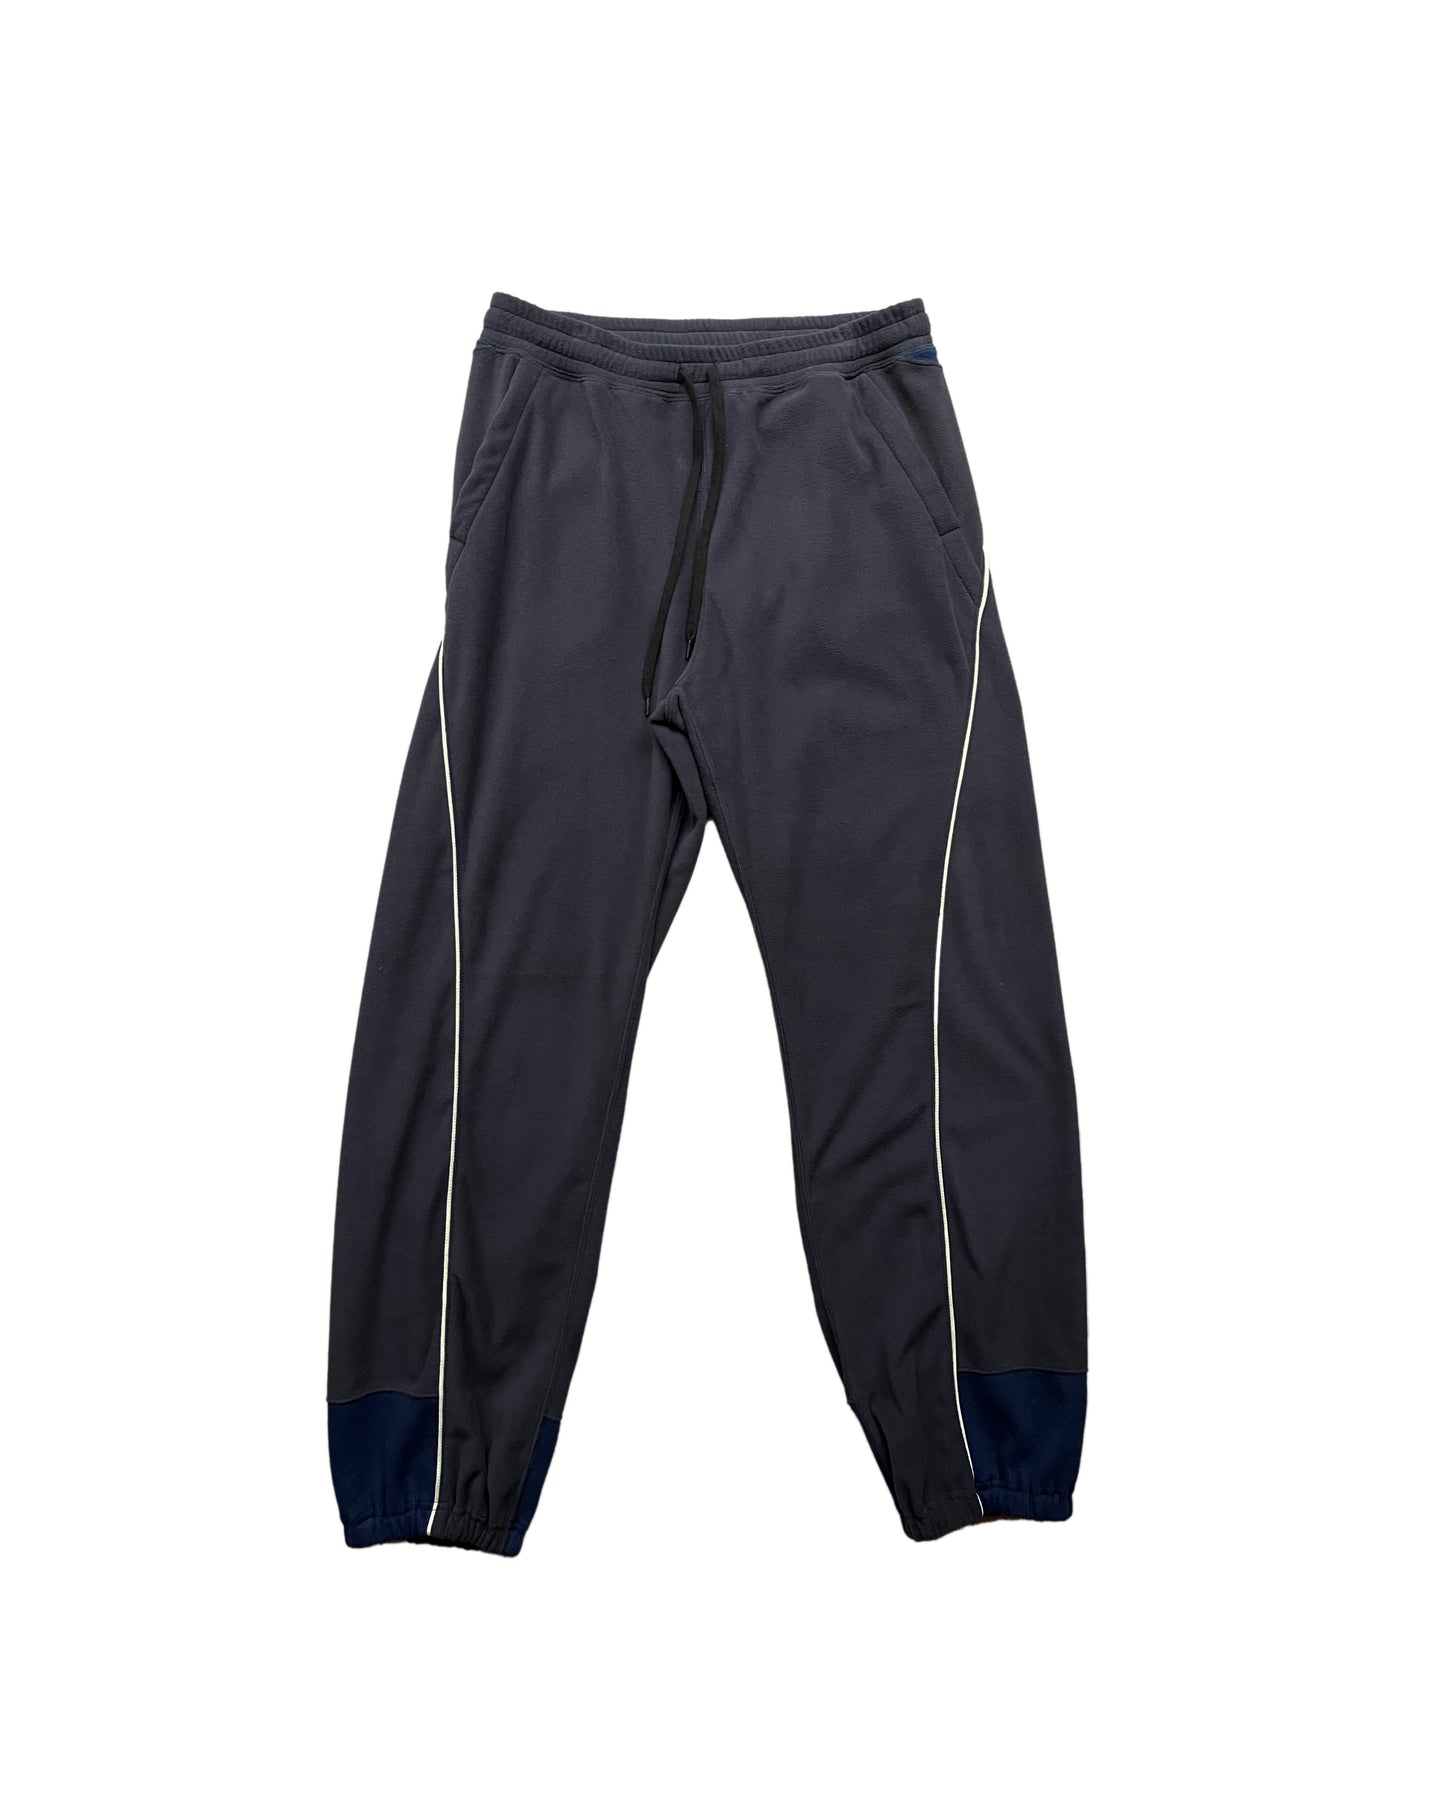 Call - CL_AW23_PT_05 / TRACK TROUSERS - Charcoal